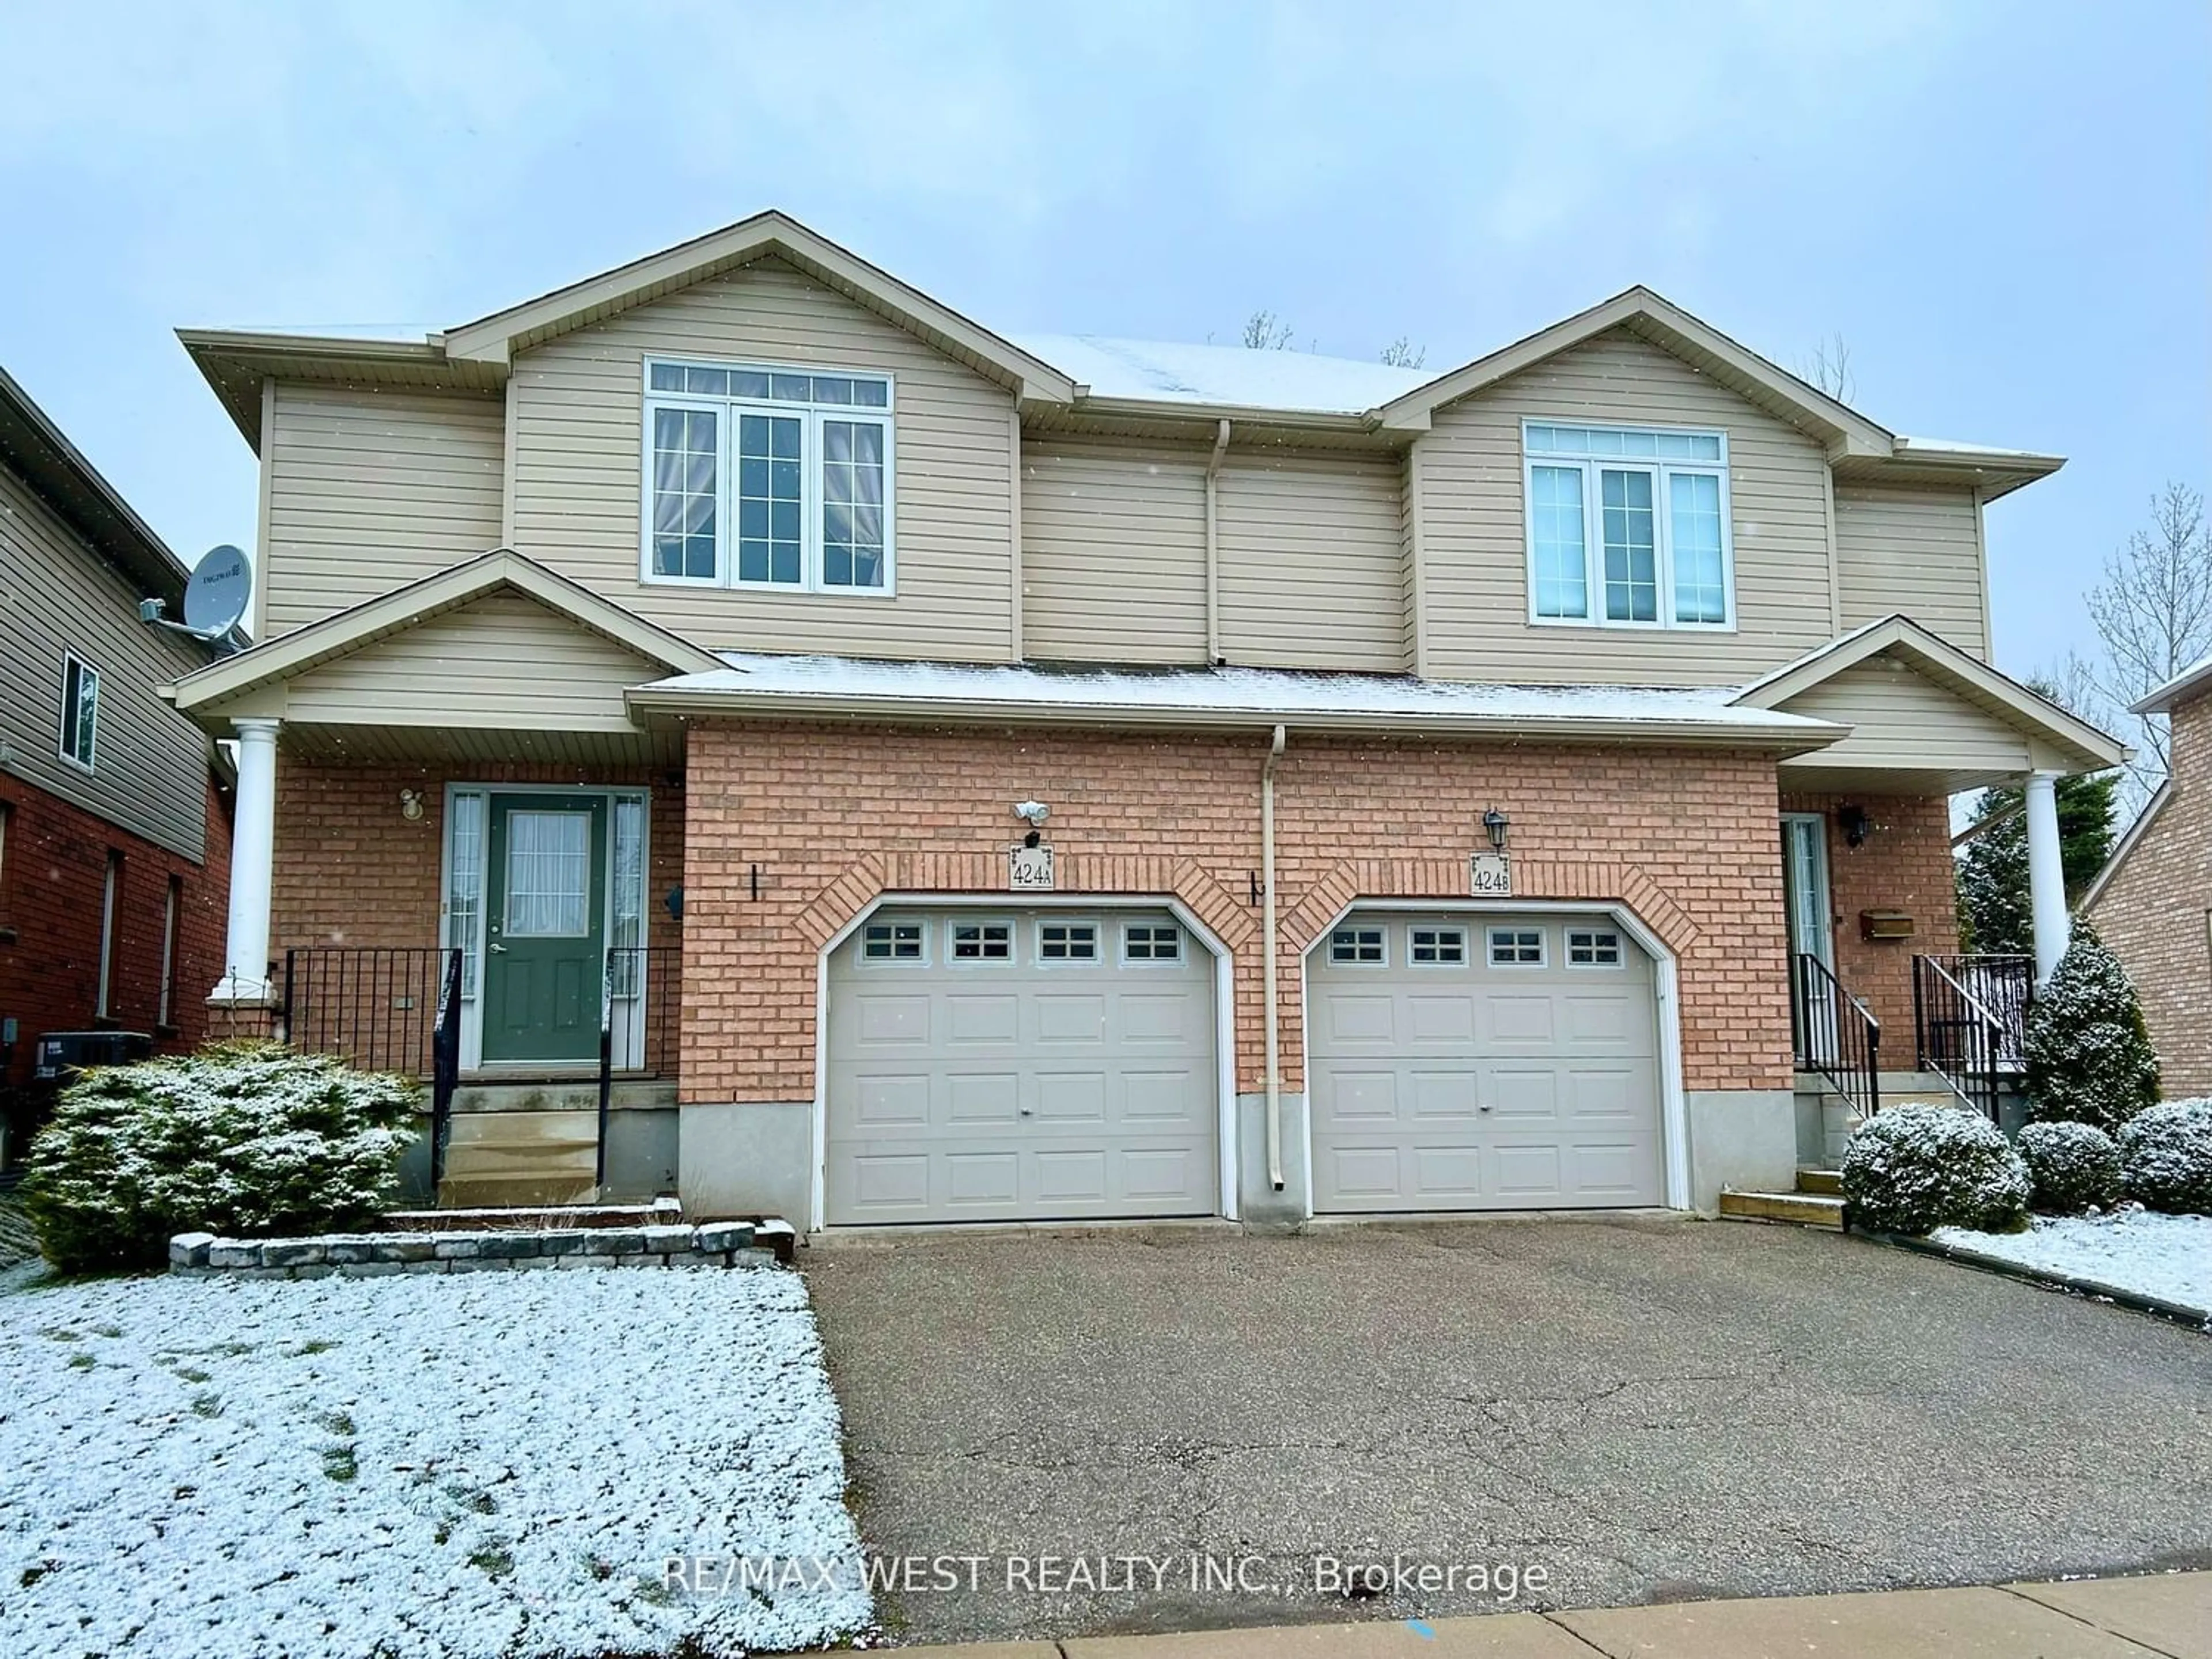 Home with brick exterior material for 424A Tealby Cres, Waterloo Ontario N2J 4Y8